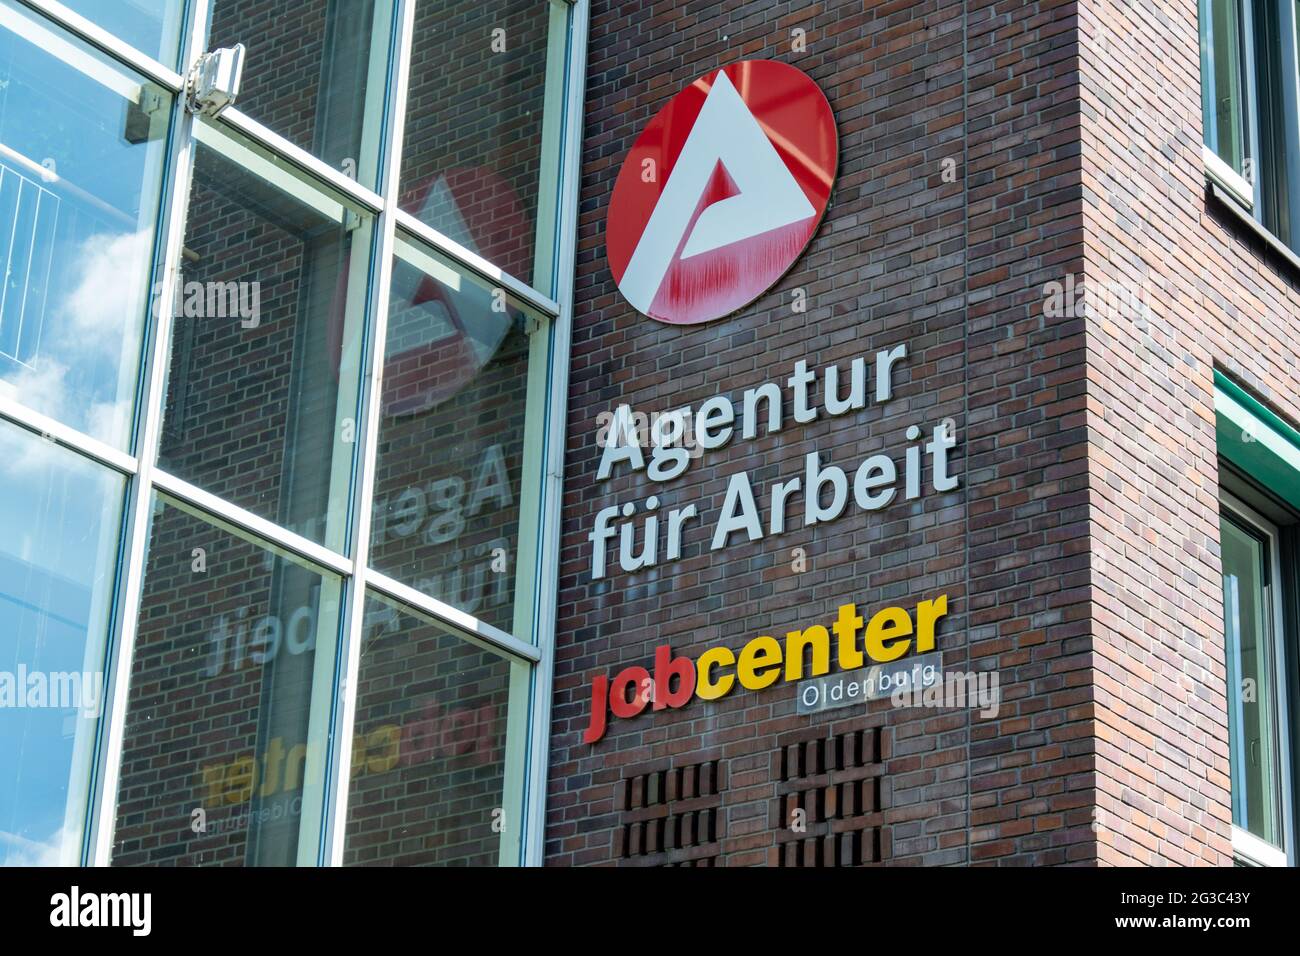 06/13/2021 Employment Agency And Job Center In Oldenburg, Lower Saxony. Stock Photo